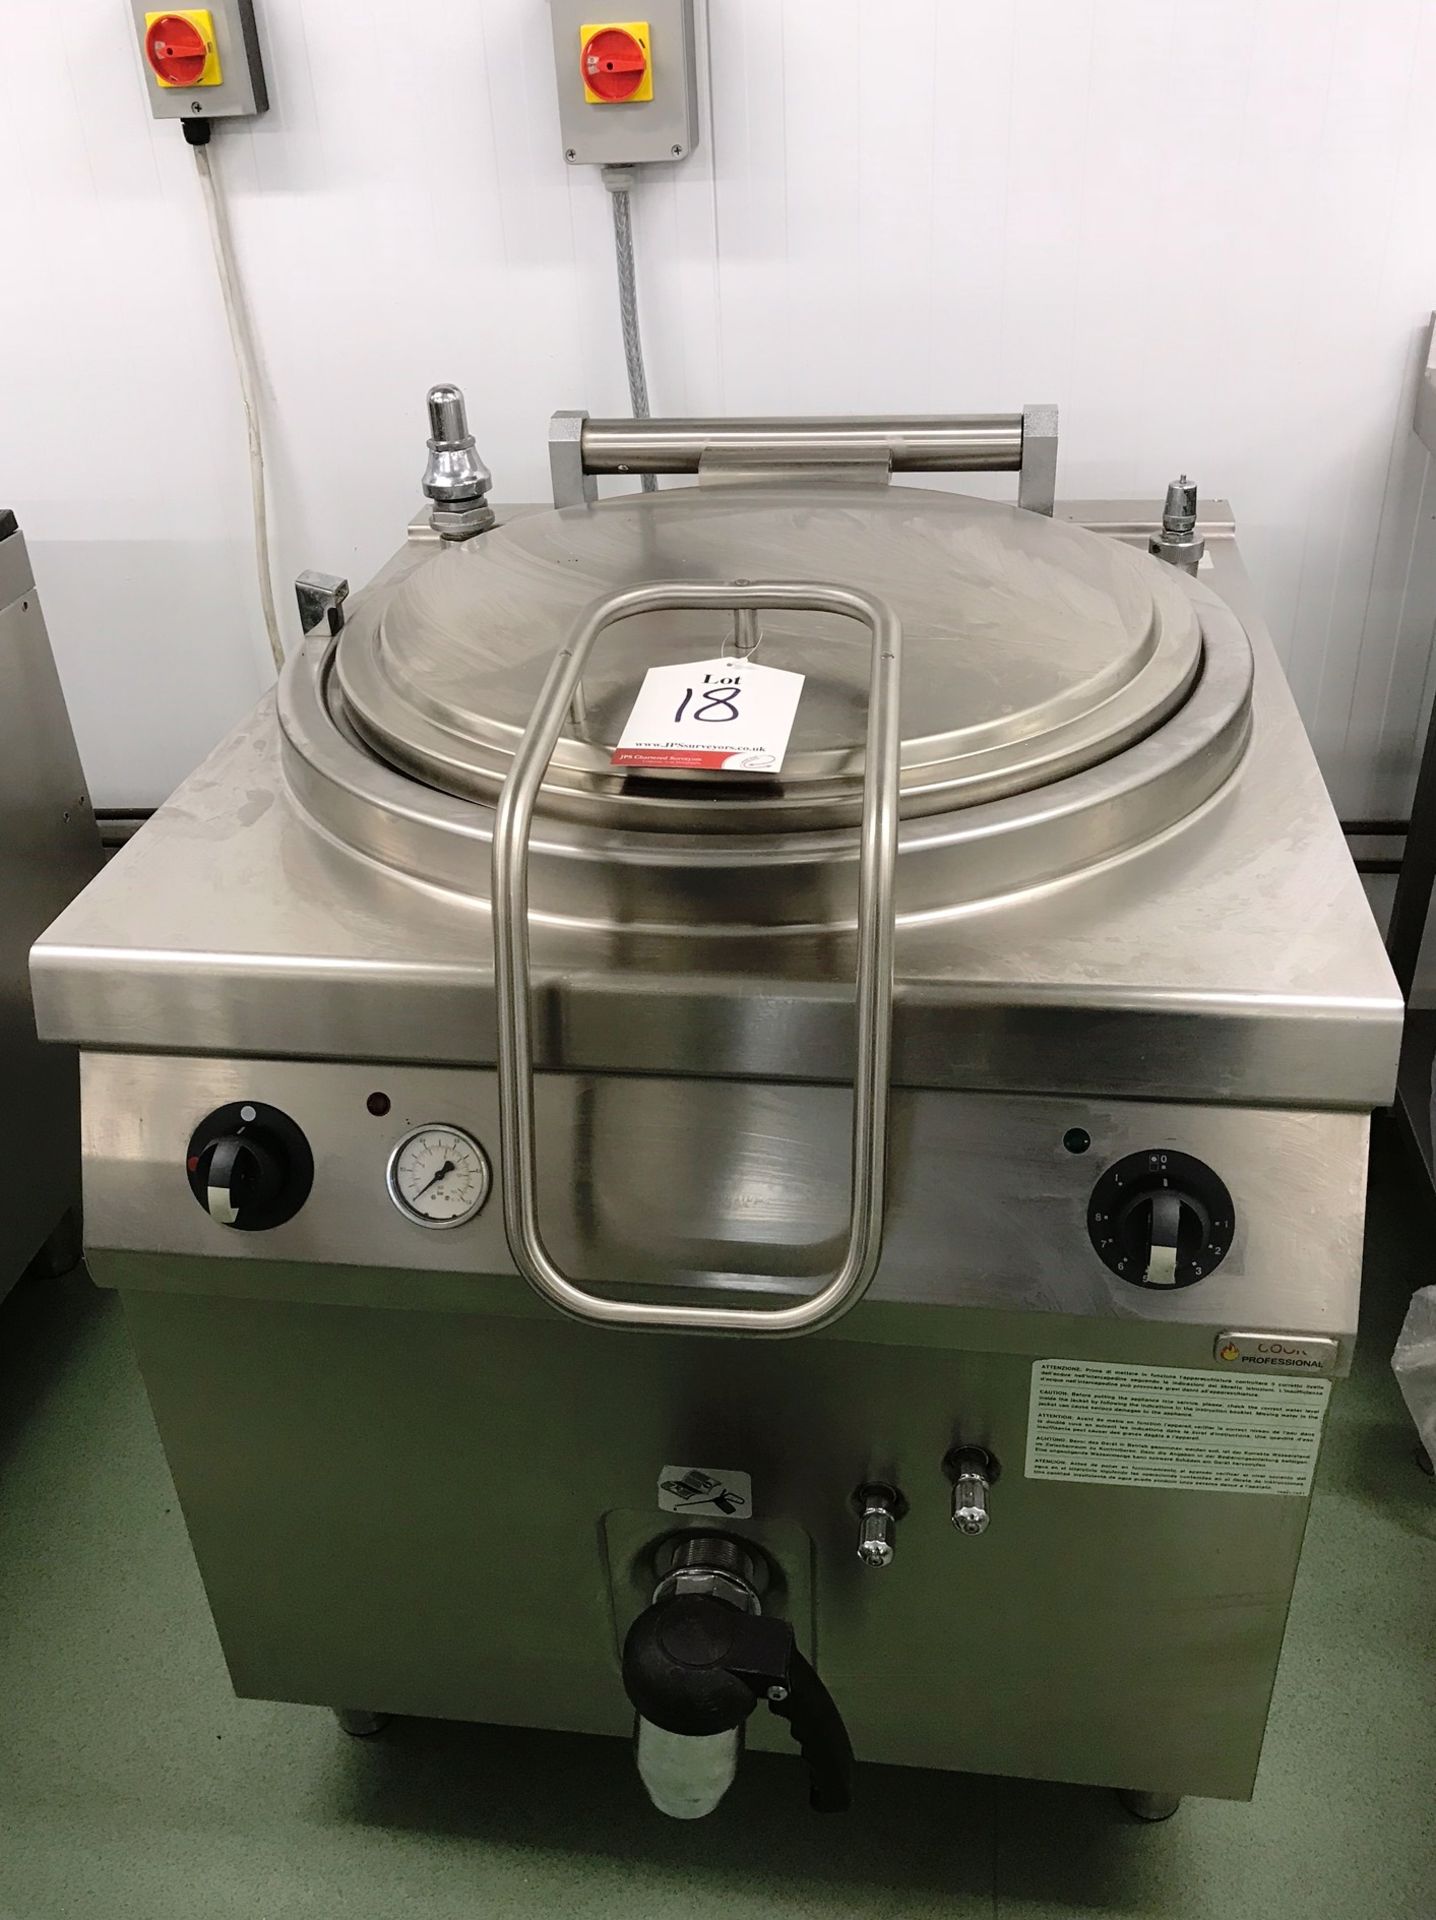 Cook Professional Electric Indirect Boiling Pan | Assumed to be 150L - Image 2 of 3